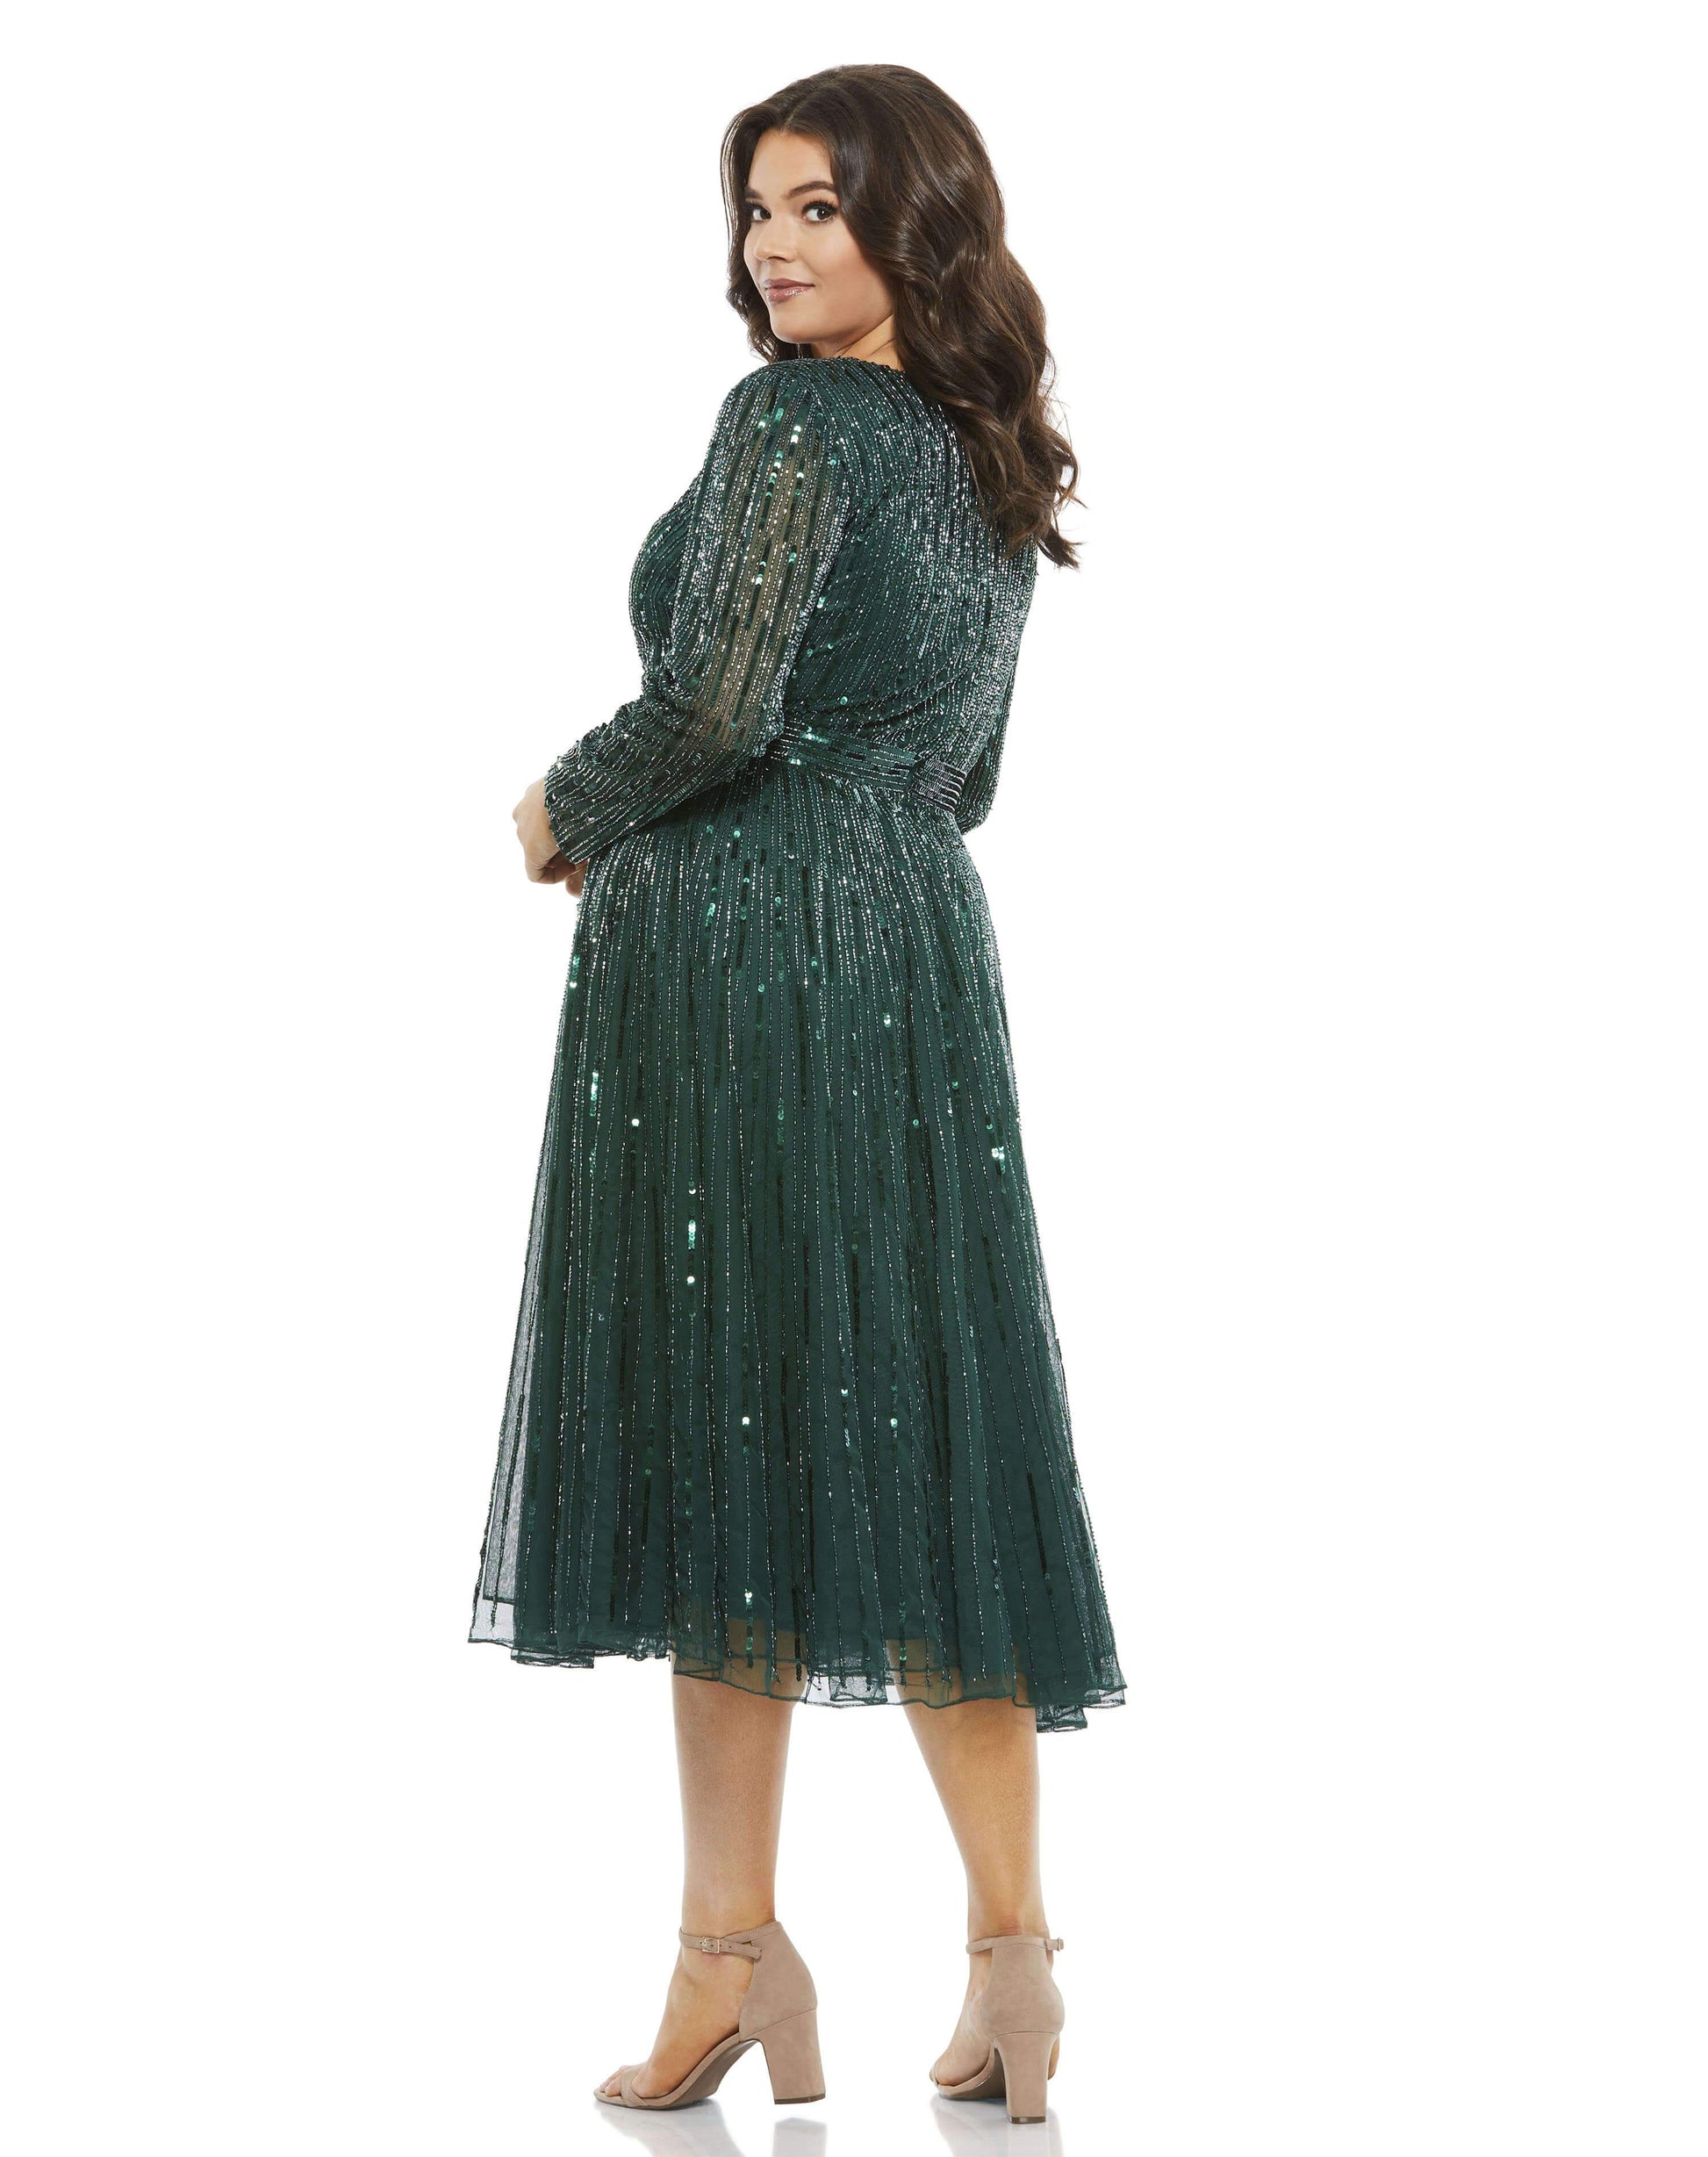 Fully embellished with vertical rows of tons sequins and beads, this dress brings the shine. The fitted bodice, sequined waistband, and flowing a-line skirt create an ultra-flattering silhouette, while the v-neckline and semi-sheer sleeves add a a bit of